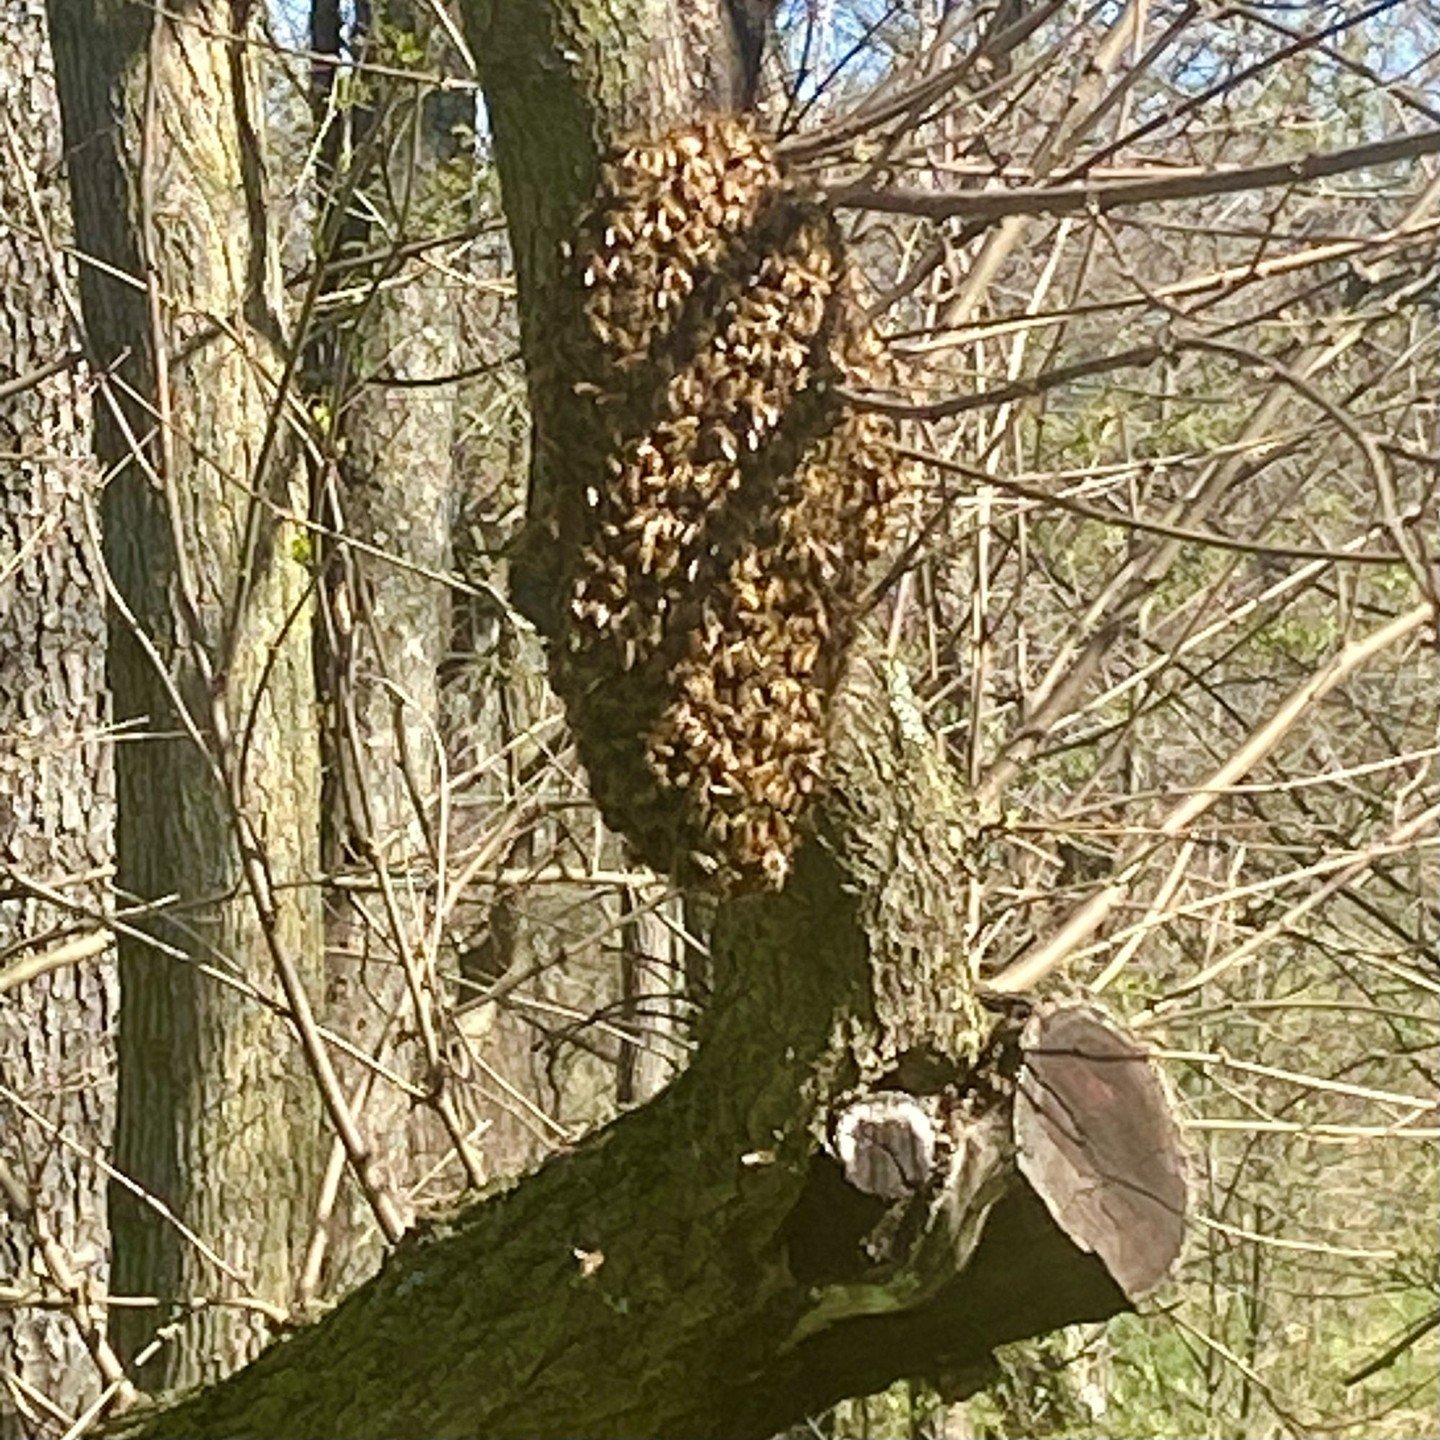 Another day, another swarm catch! There&rsquo;s nothing better than free bees, even if they were probably ours to begin with. #beekeeping #loudouncounty